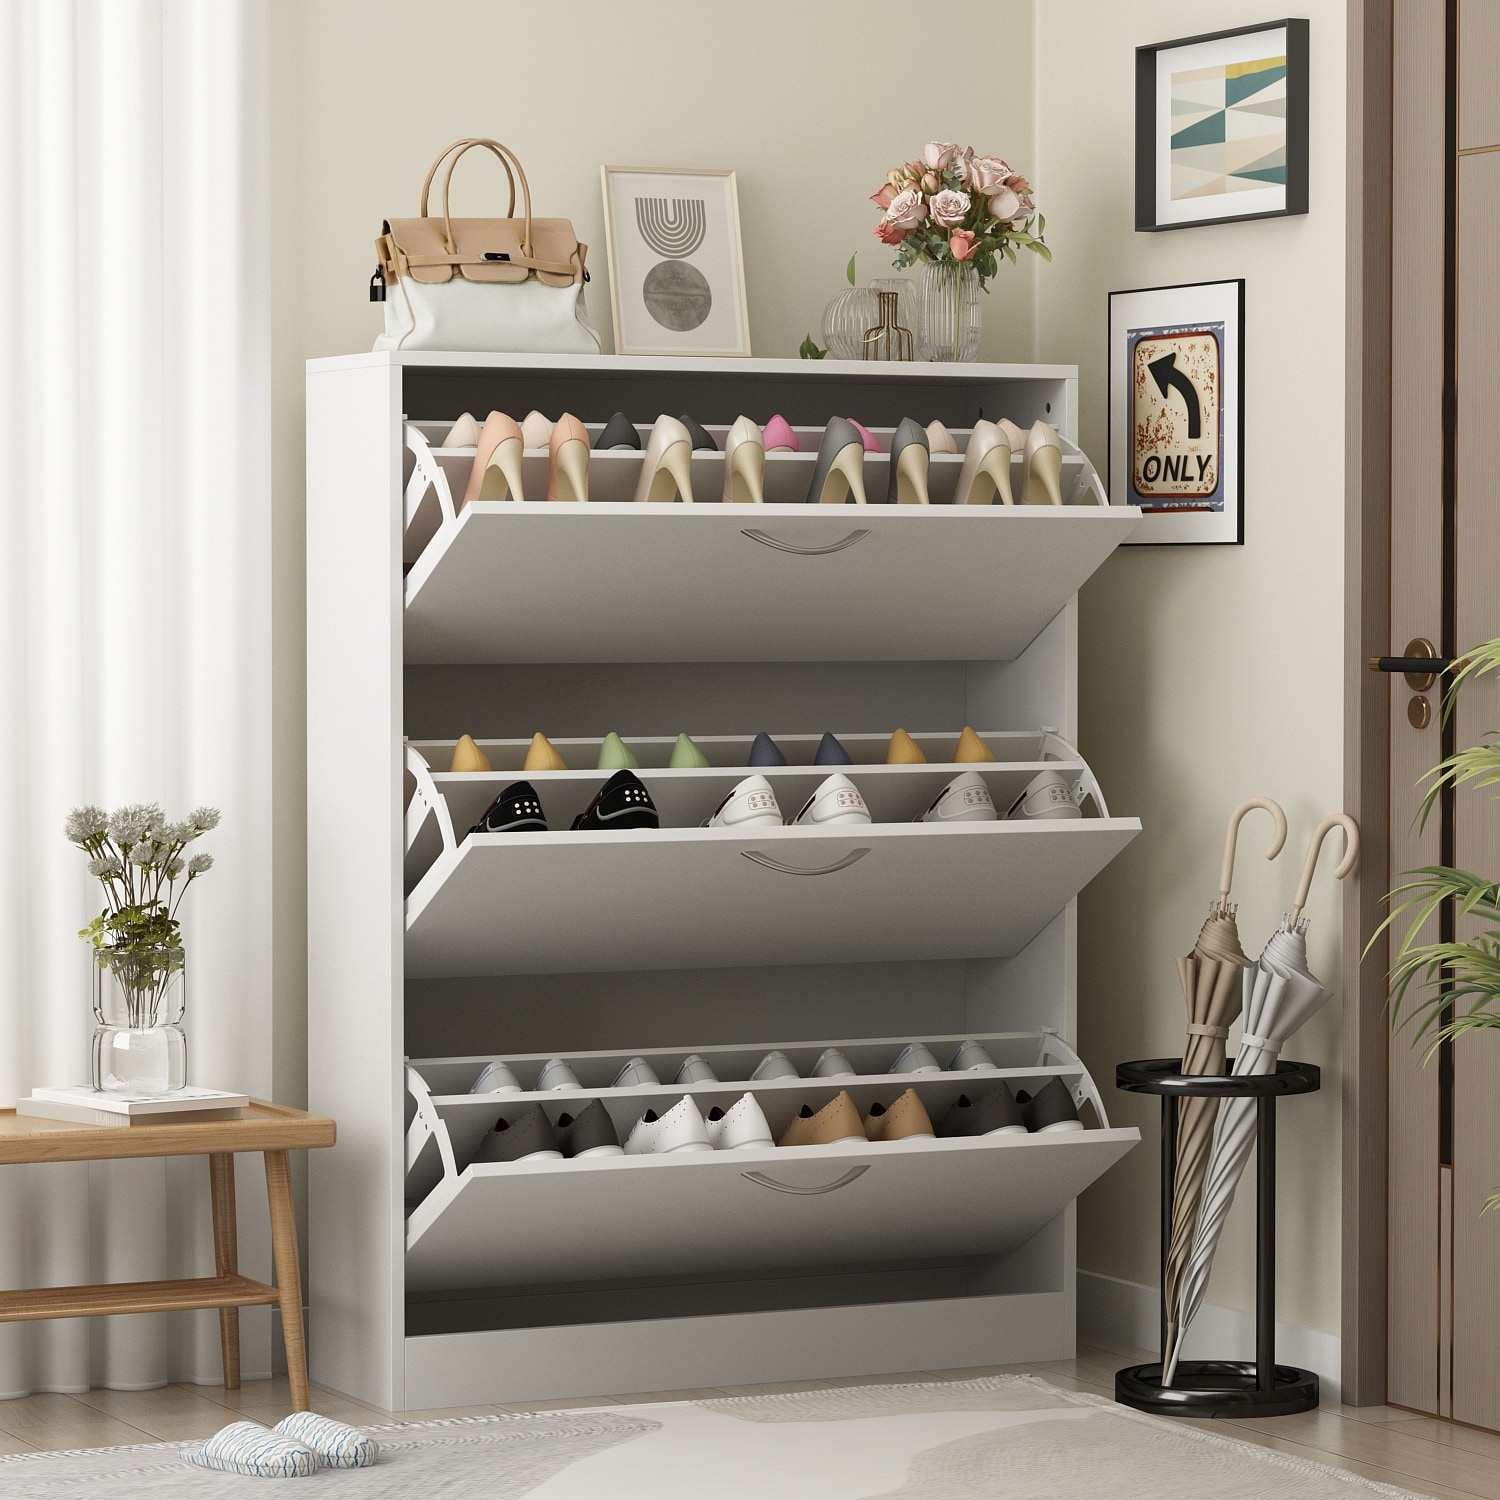 https://ak1.ostkcdn.com/images/products/is/images/direct/4a41573bbe4f23c23395c2b662ab70c262fc4672/Home-Modern-3-Drawer-Shoe-Cabinet-3-Tier-Shoe-Rack-Storage-Organizer.jpg